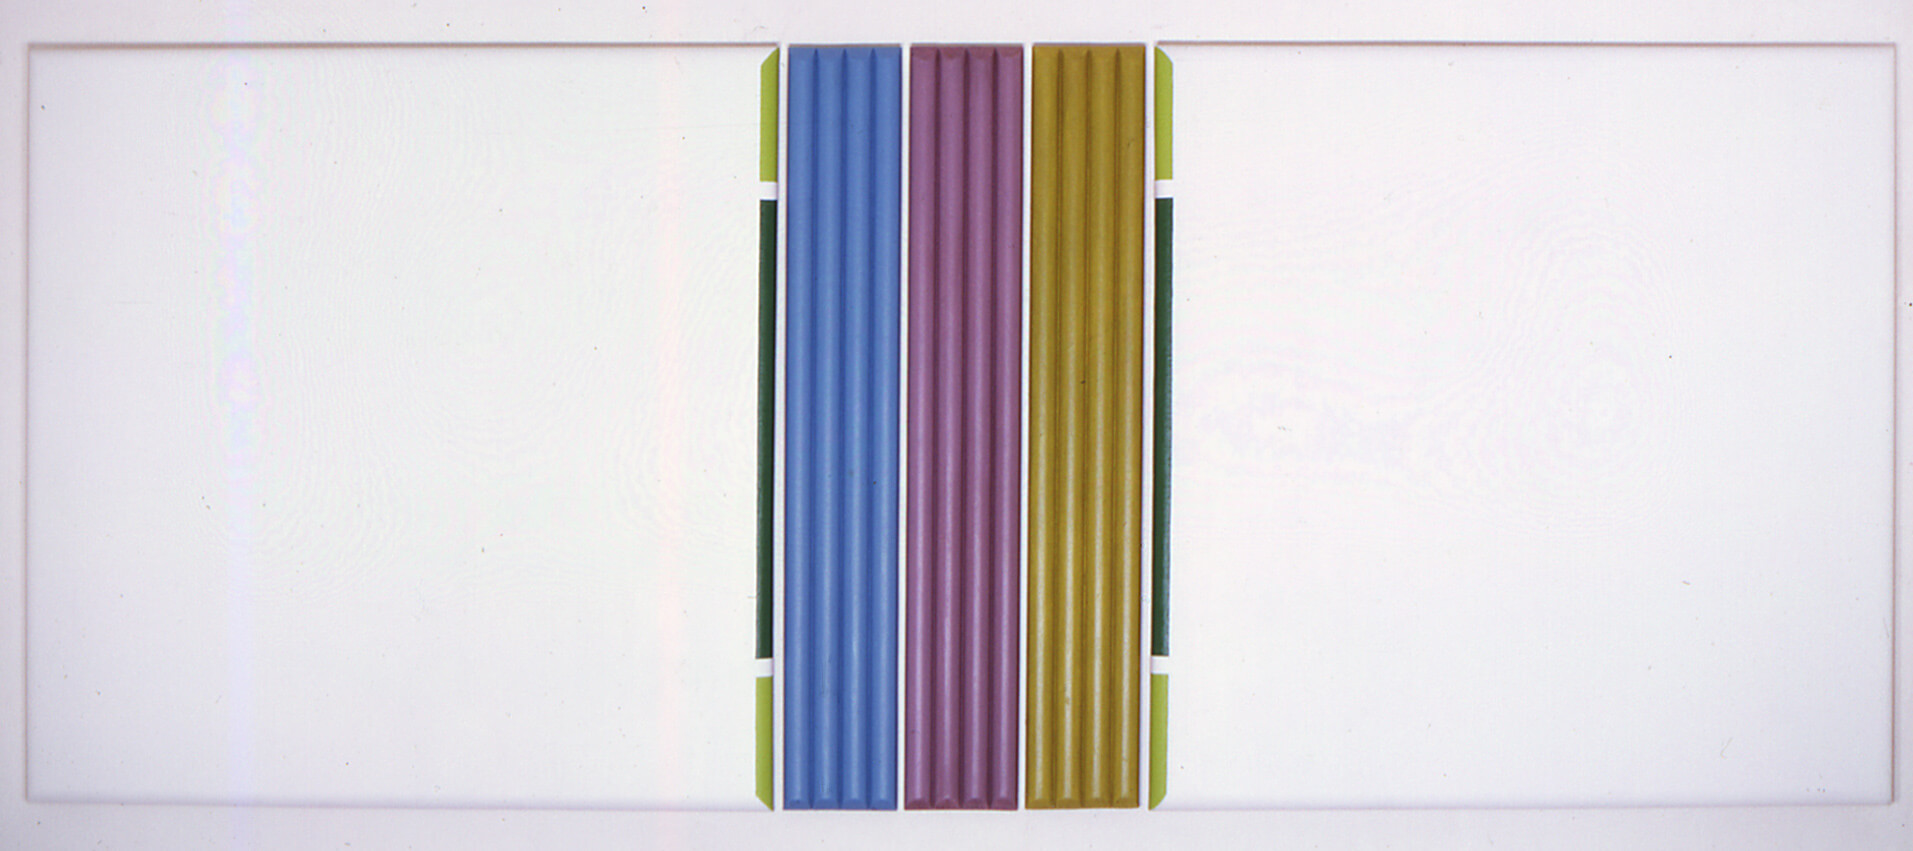 Dana Gordon, 1968-69, untitled, 38 x 90 inches, acrylic on canvas and wood (5 panels) (courtesy of the artist)